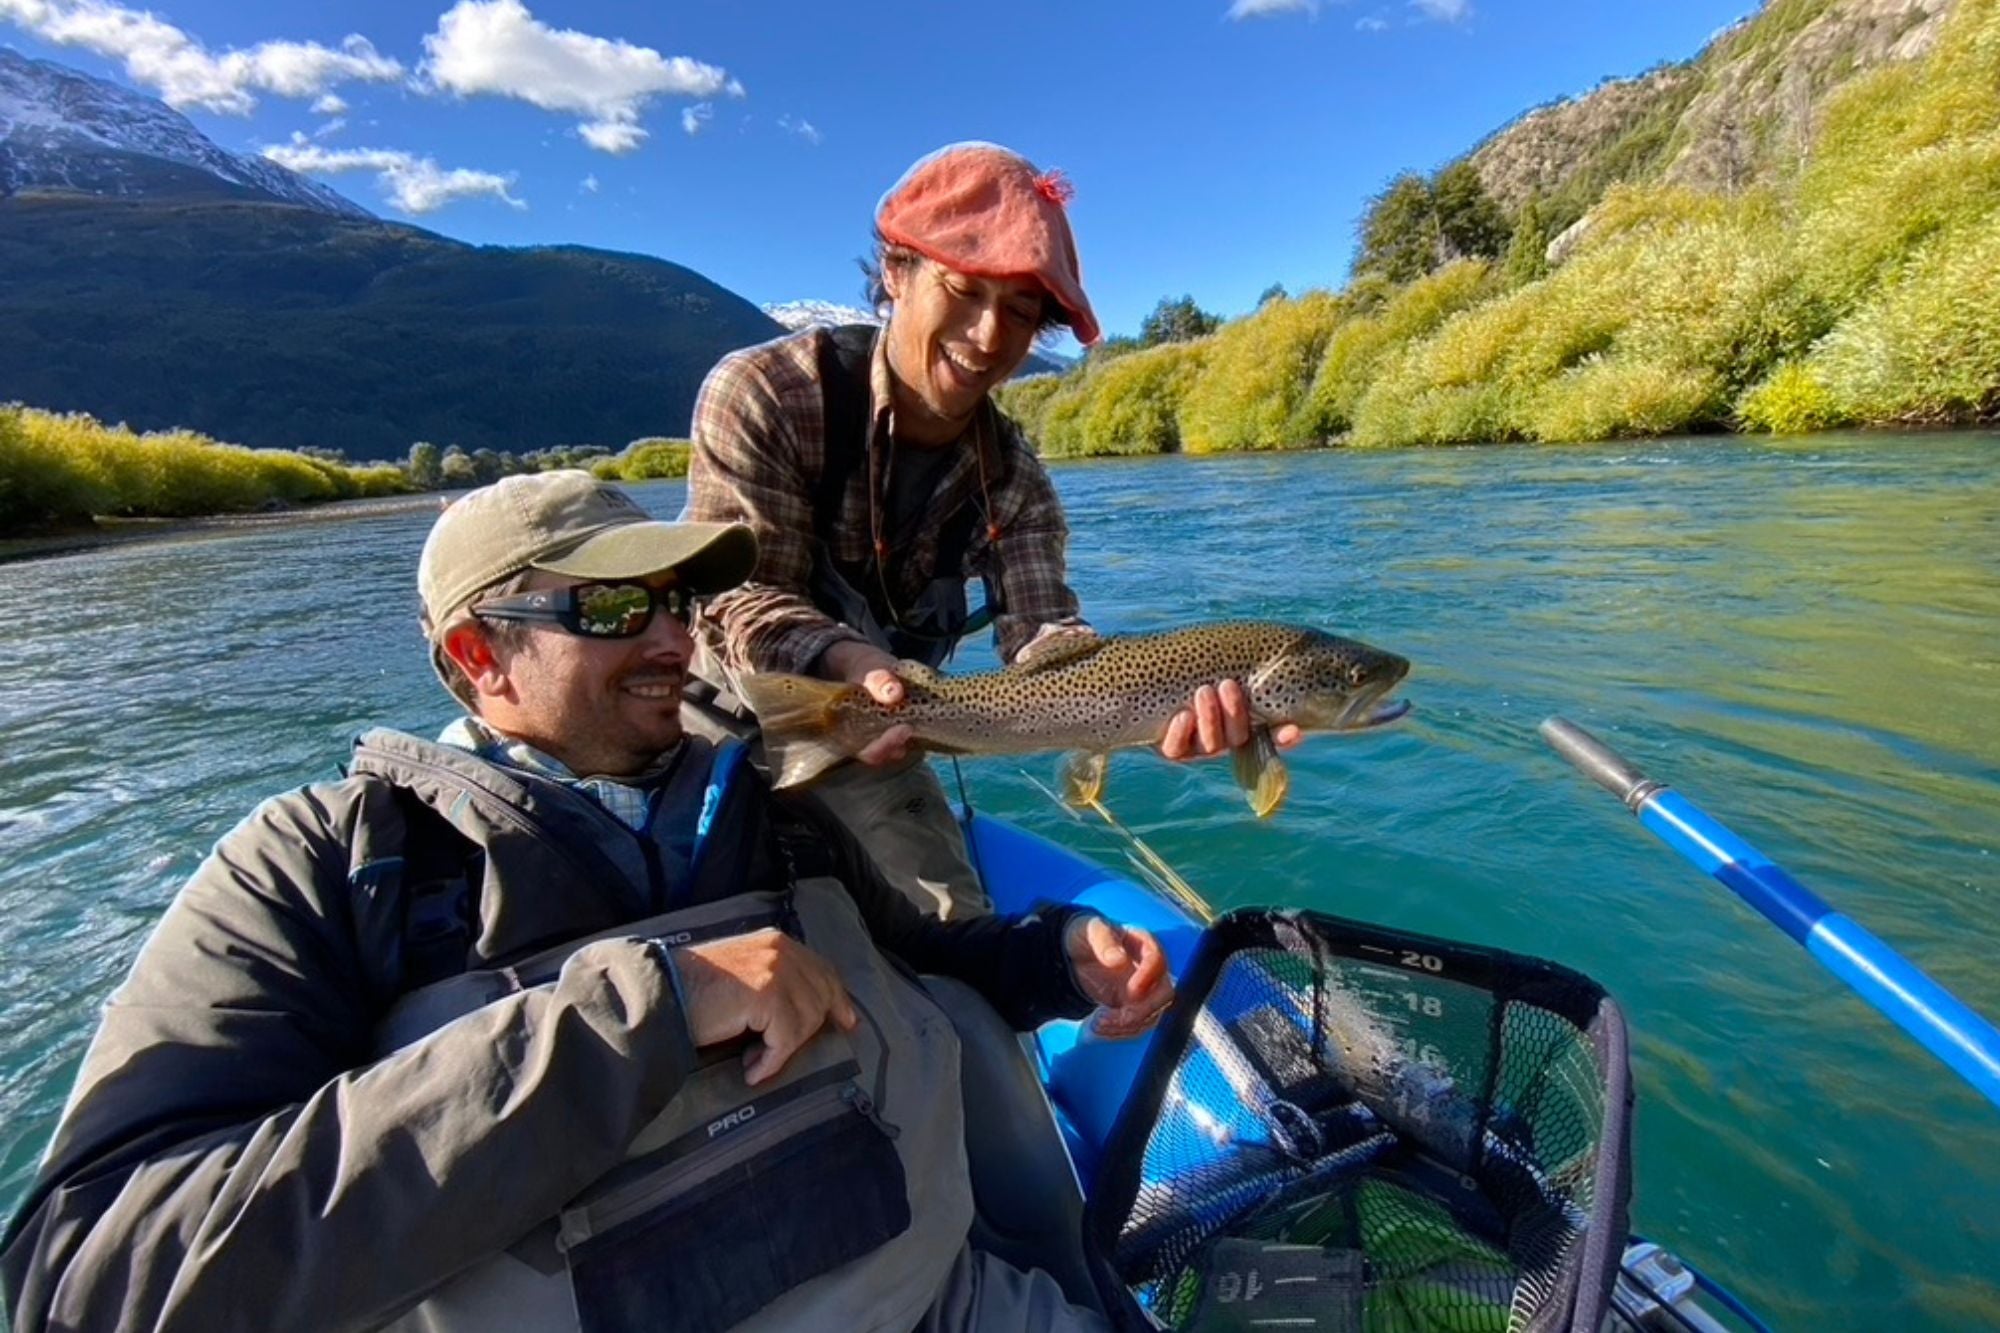 TRIP REPORT - Fall in Argentina with El Encuentro Fly Fishing